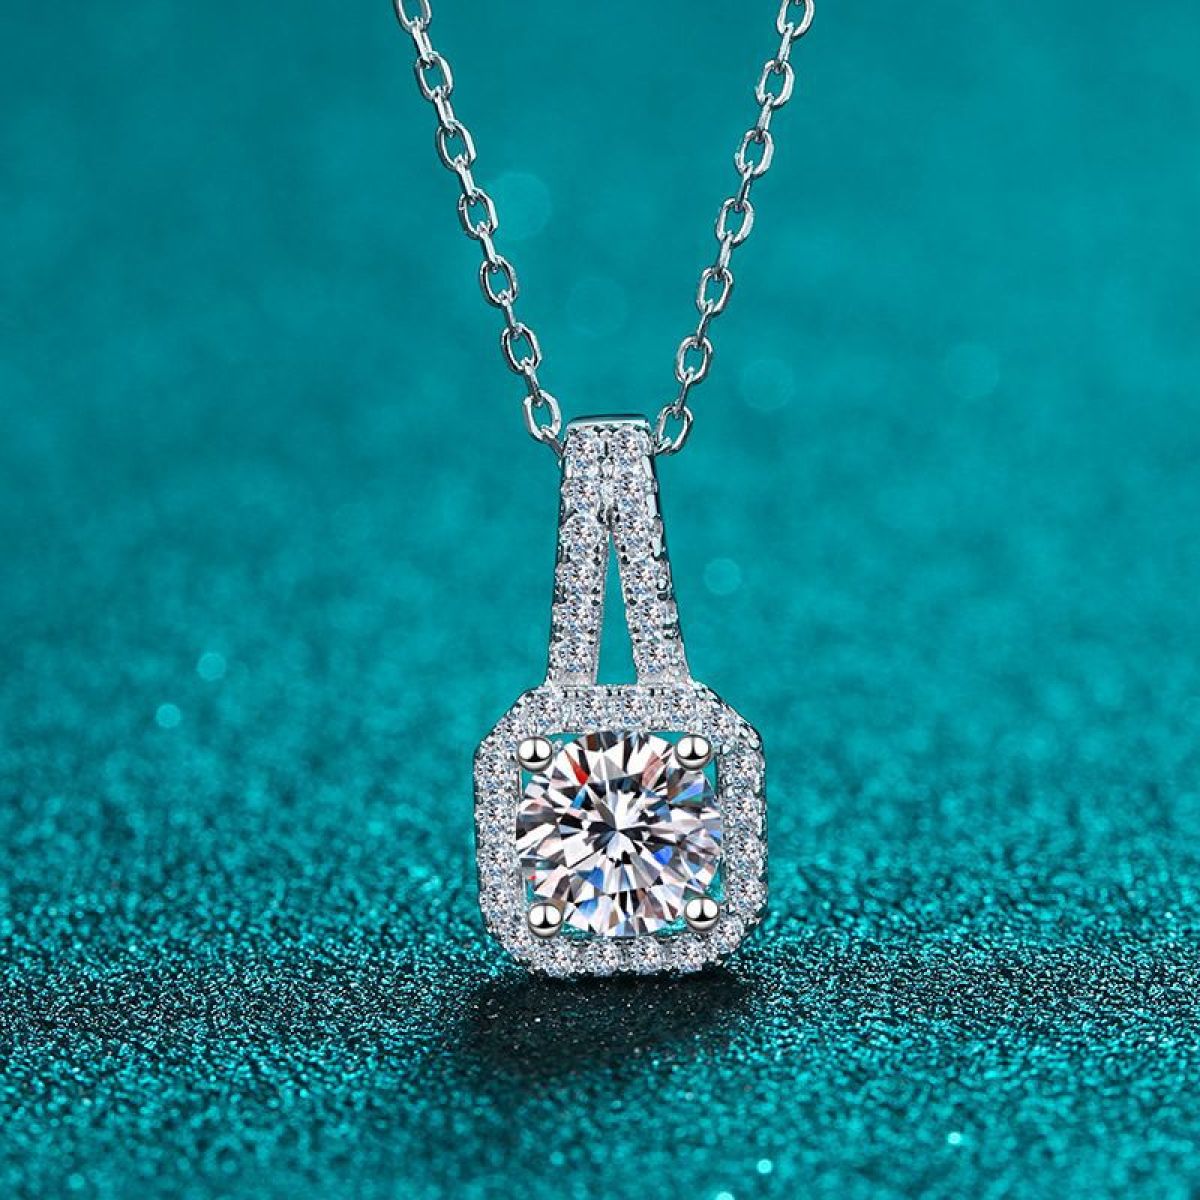 Octagon Moissanite Necklace - 925 Sterling Silver